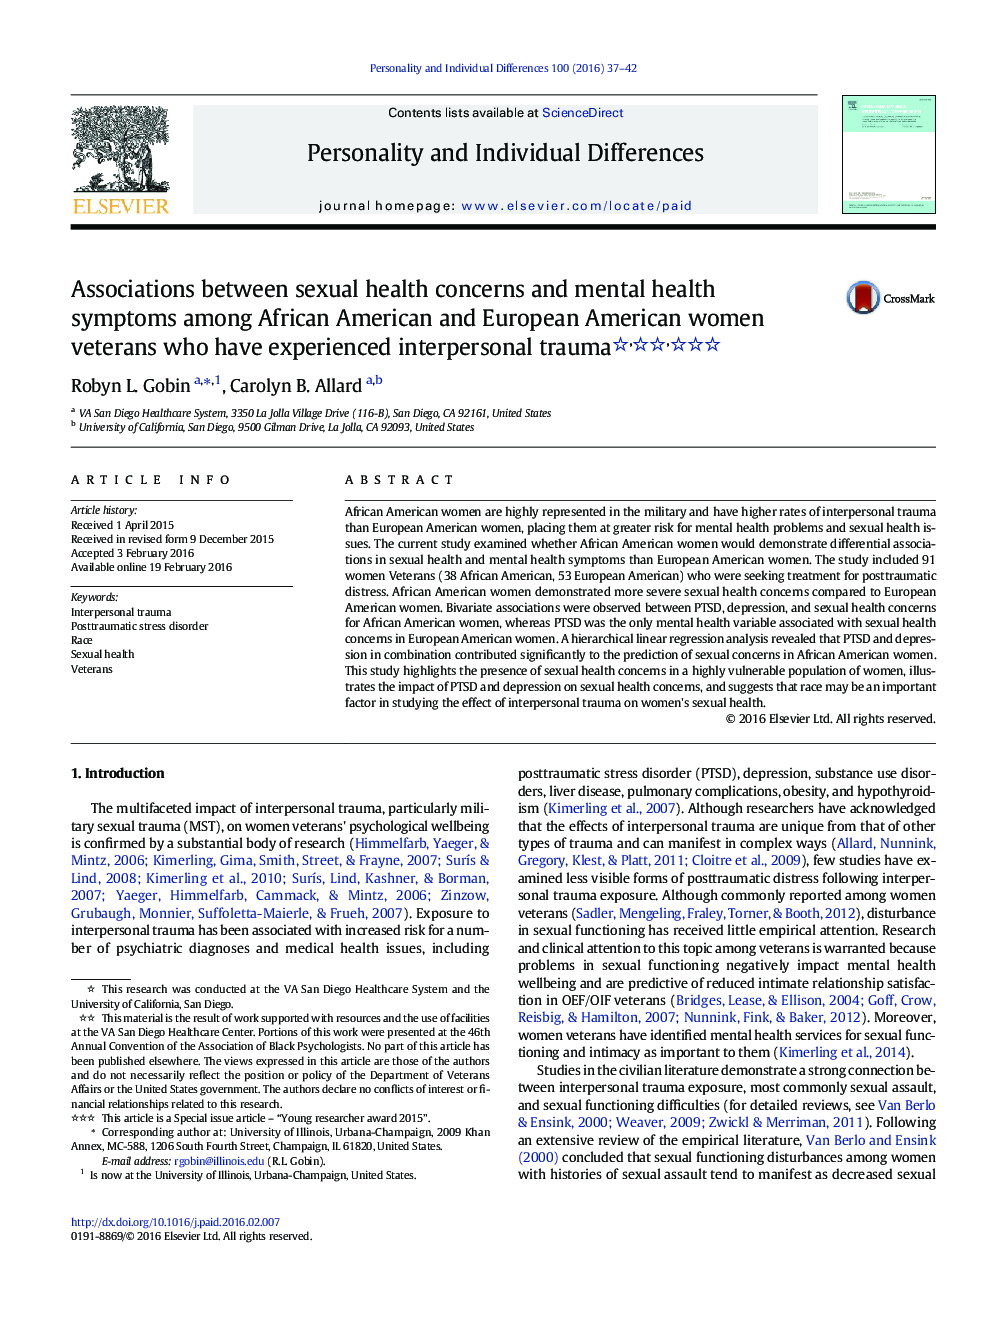 Associations between sexual health concerns and mental health symptoms among African American and European American women veterans who have experienced interpersonal trauma 